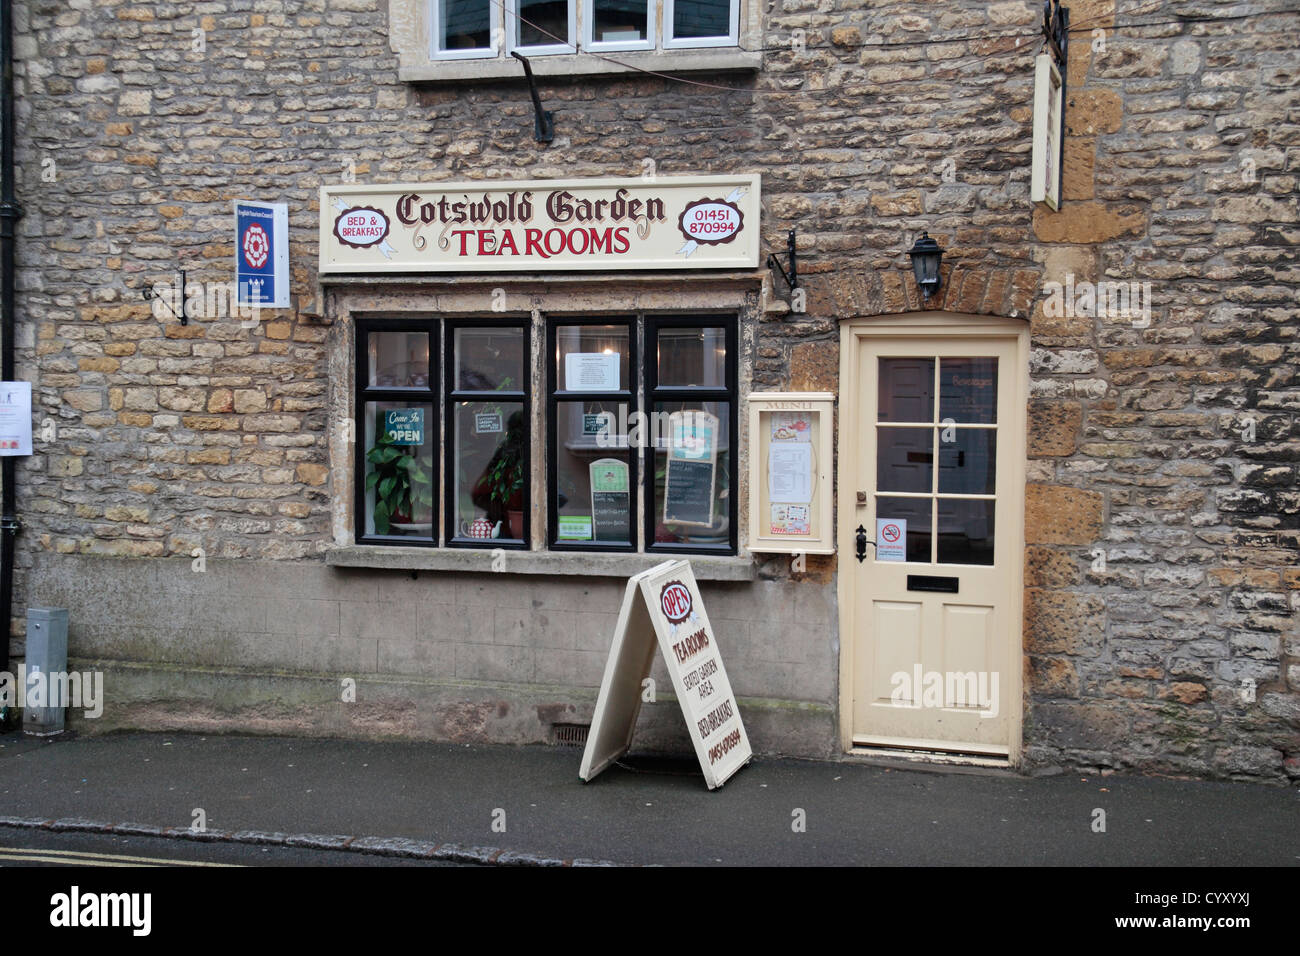 The Cotswold Garden Tea Rooms in Stow on the Wold, Gloucestershire, England Stock Photo